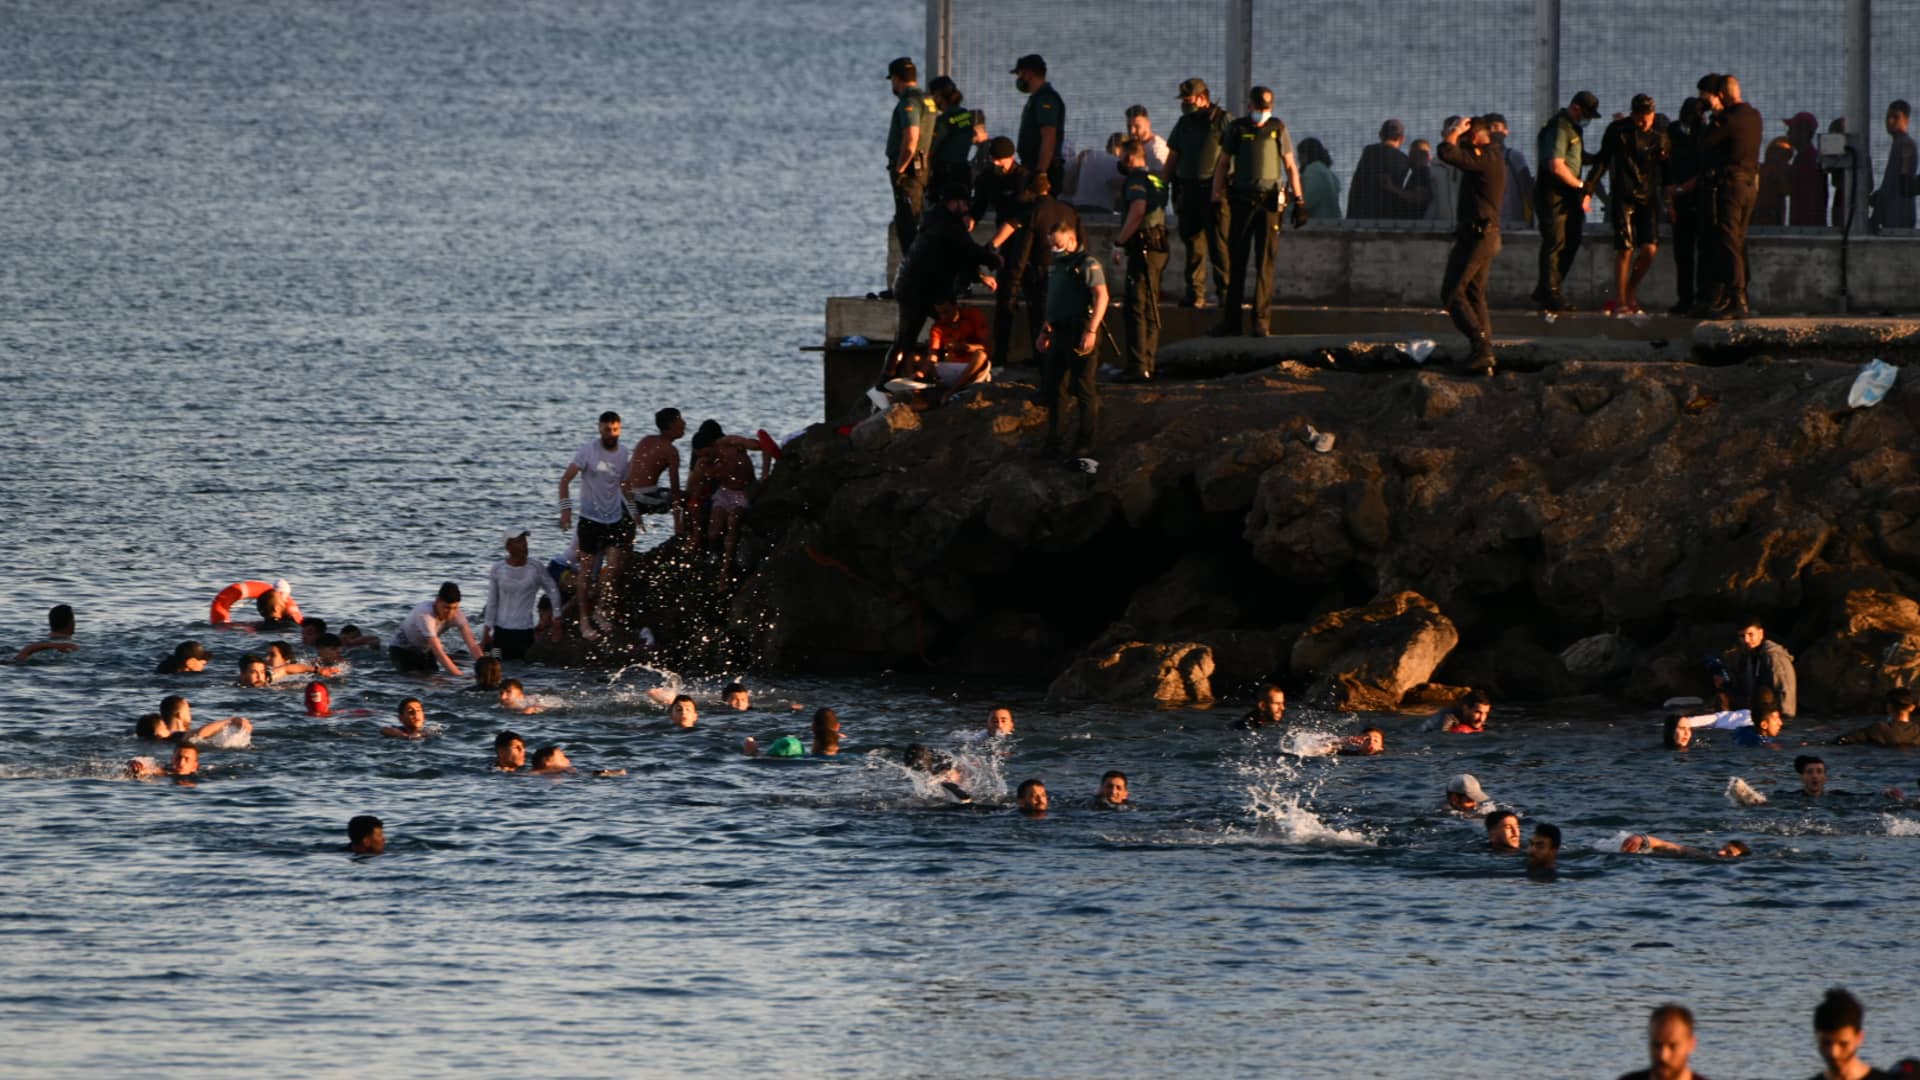 Migrants swim towards the beach of Tarajal from Morocco, as others already on the Spanish side walk along the beach on May 17, 2021 in Ceuta, Spain.